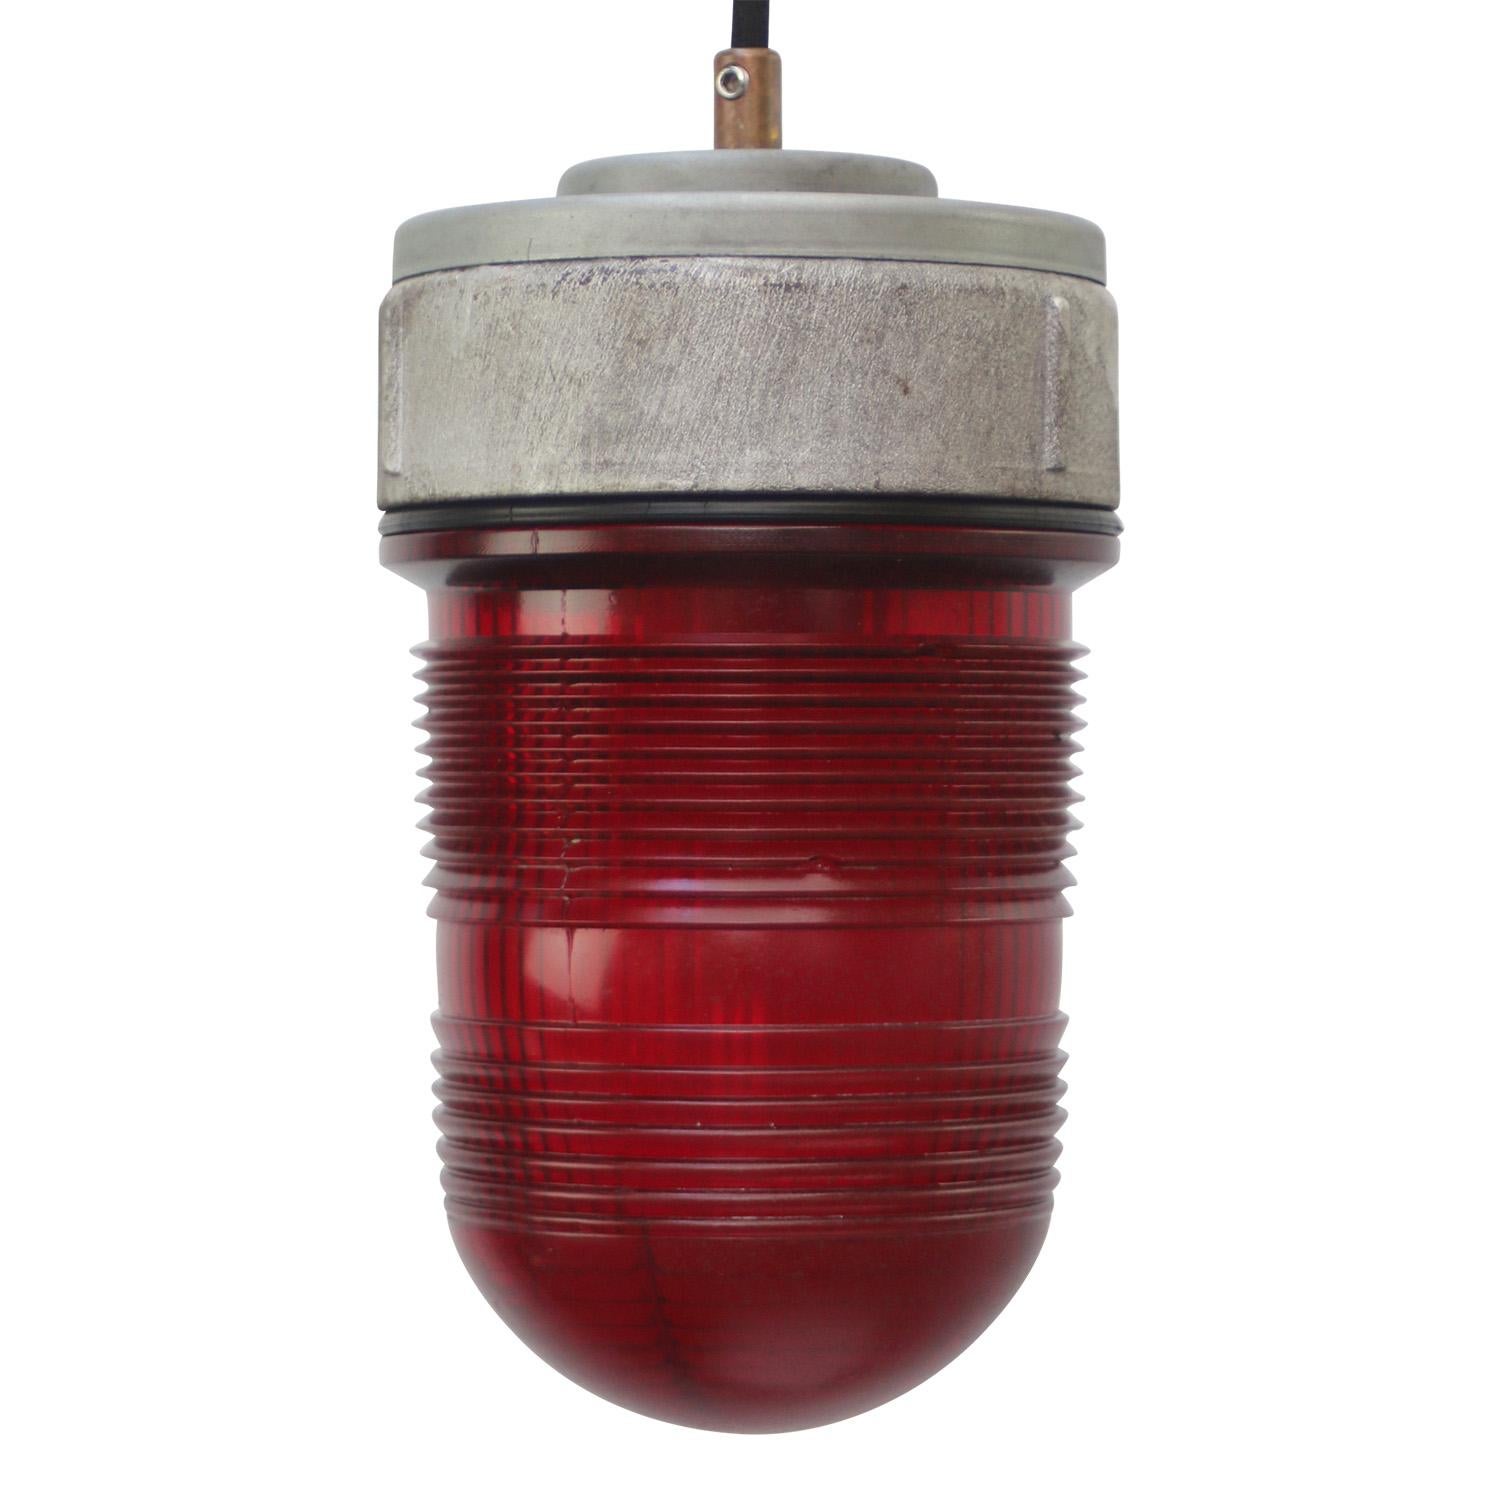 Runway light Airport.
Metal with red safety glass

Weight: 1.90 kg / 4.2 lb

Priced per individual item. All lamps have been made suitable by international standards for incandescent light bulbs, energy-efficient and LED bulbs. E26/E27 bulb holders